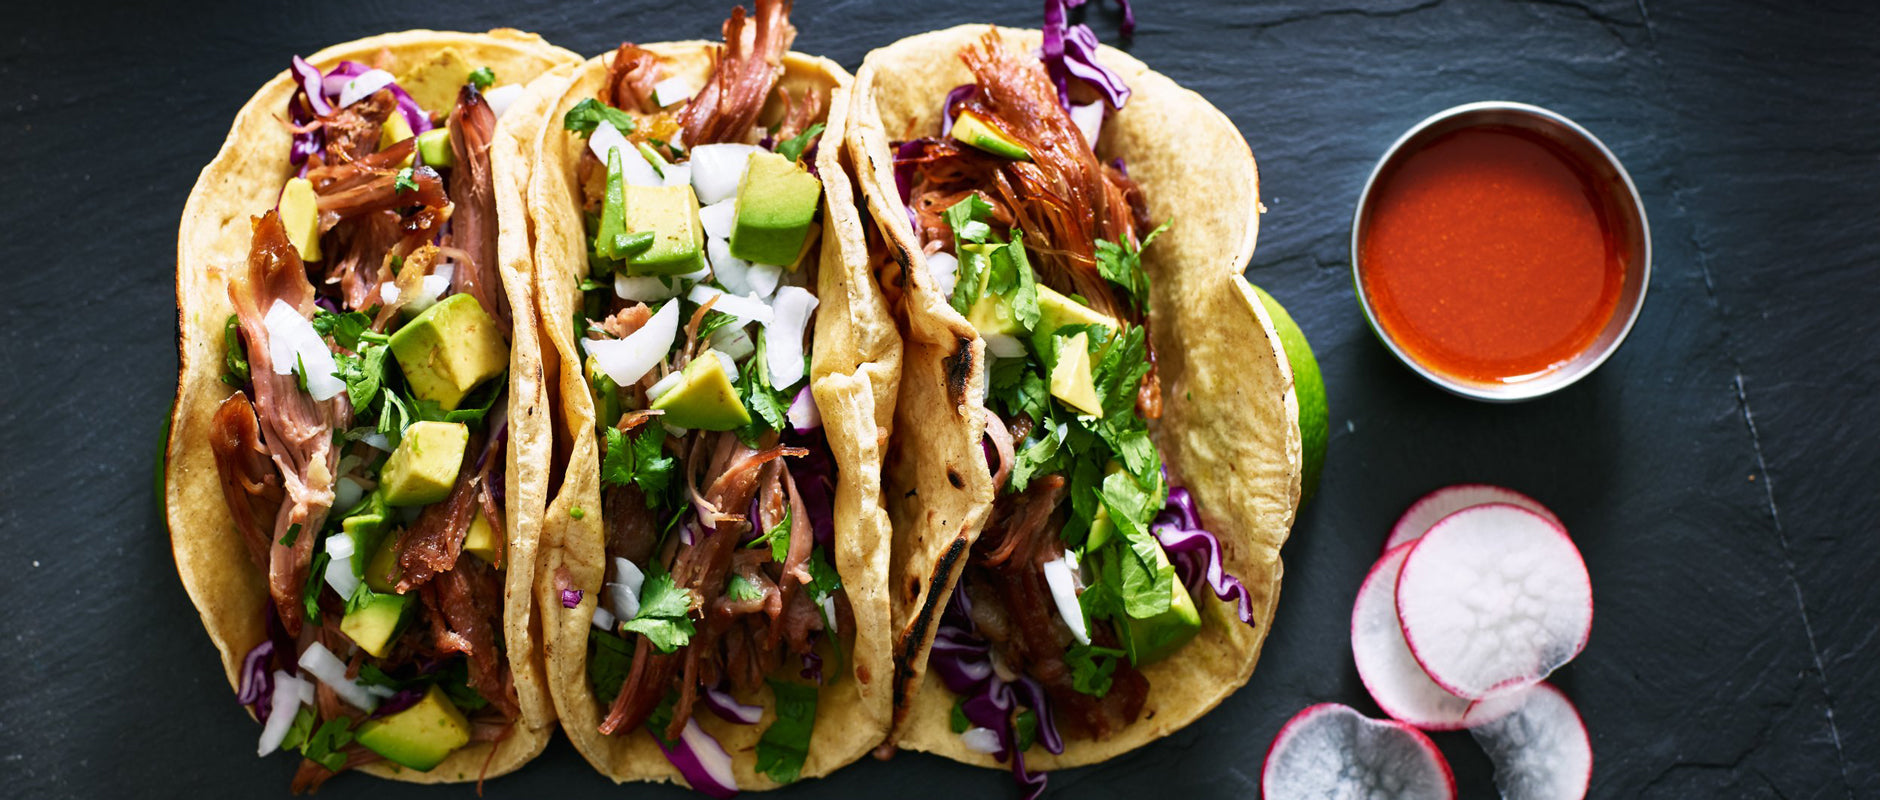 TACO TUESDAY DELIGHTS: DISCOVER THE TOP 5 RECIPES THAT WILL MAKE YOUR TASTE BUDS DANCE!